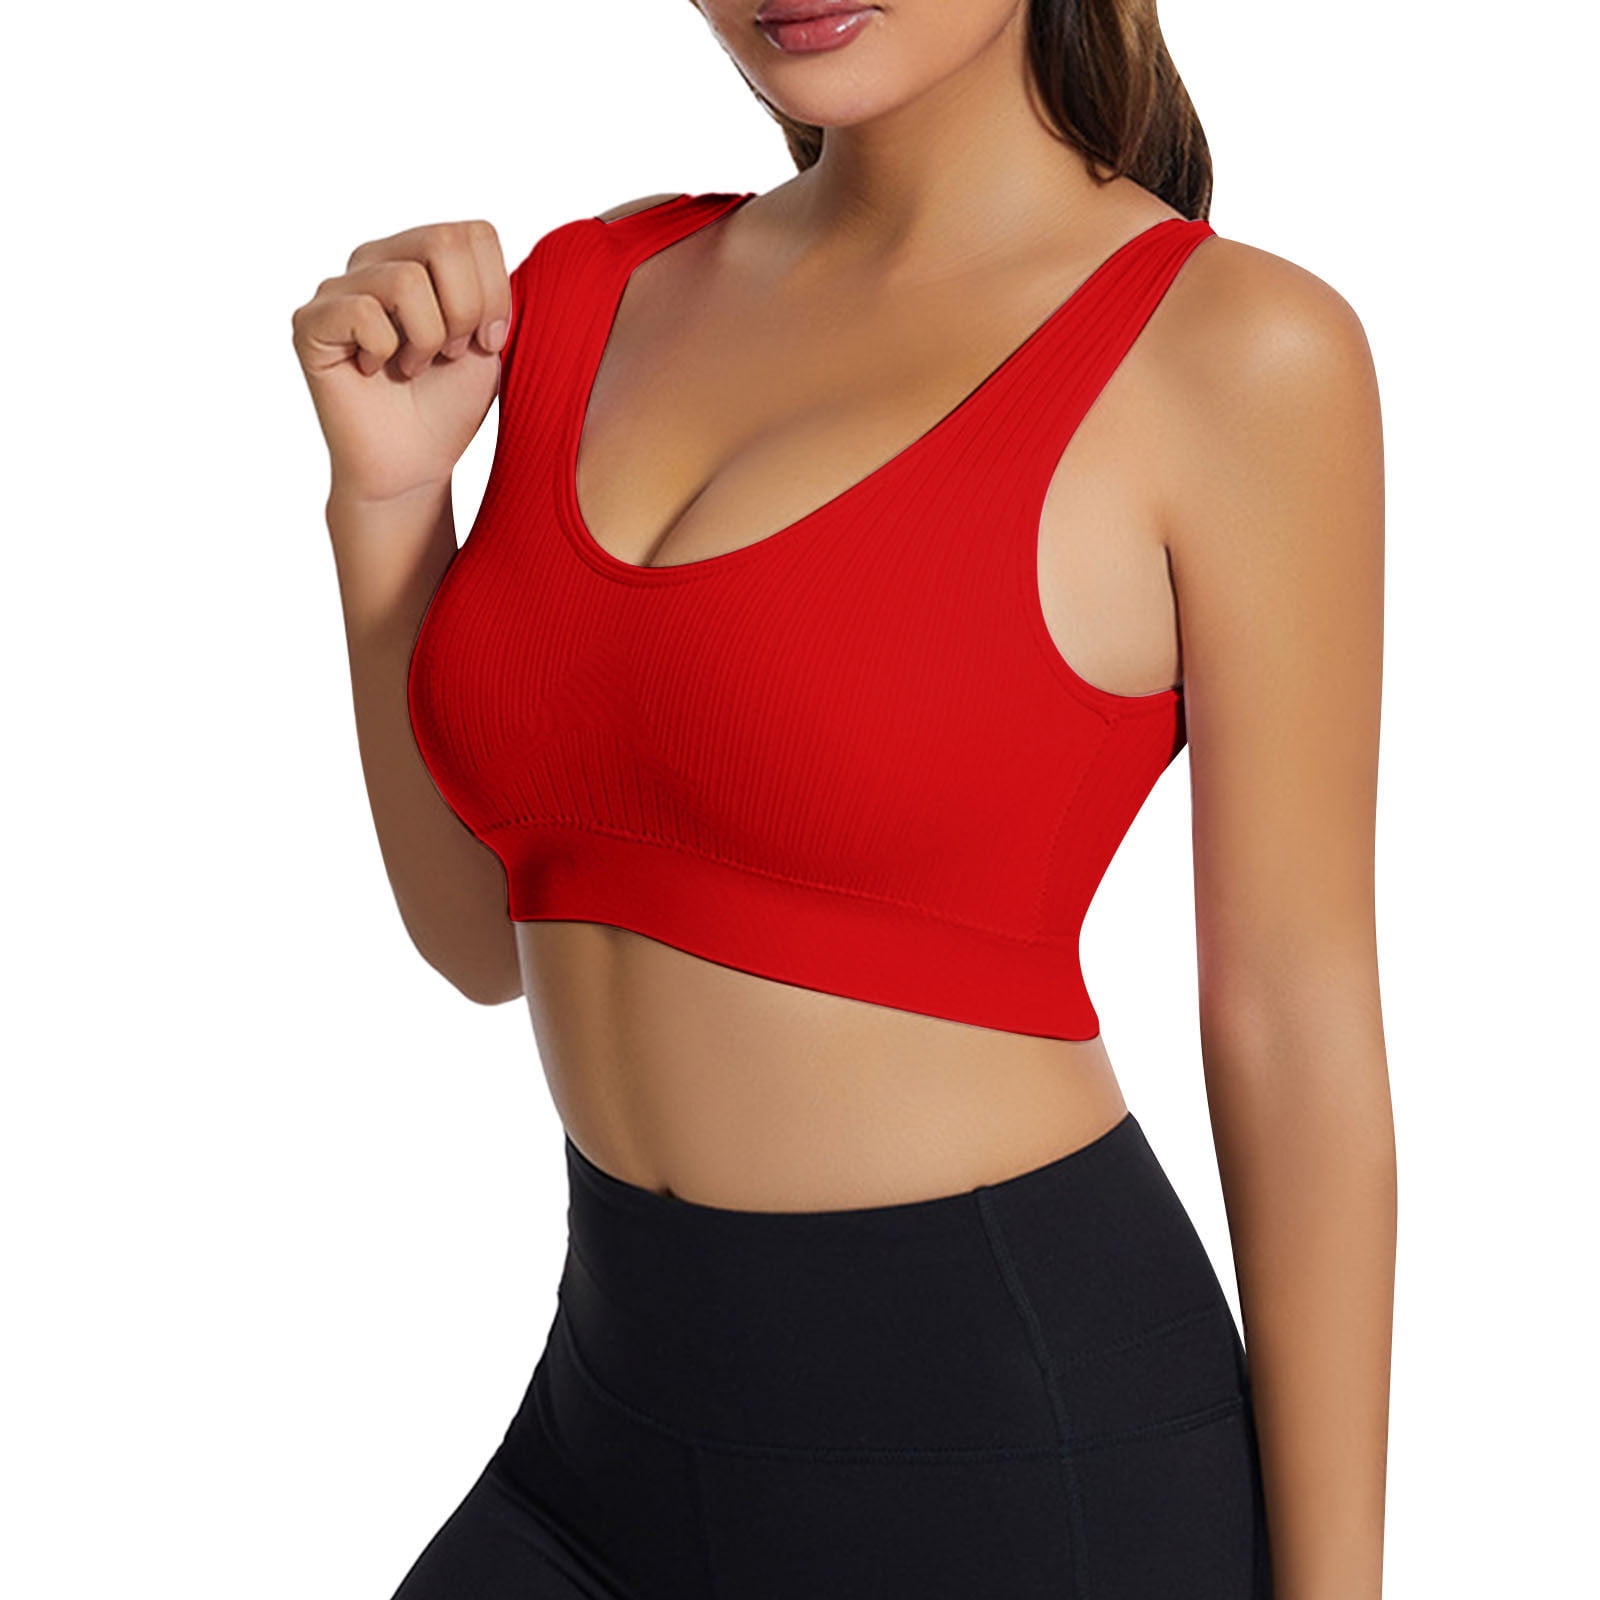 Quealent Push Up Sports Bras For Women One Shoulder Sports Bra